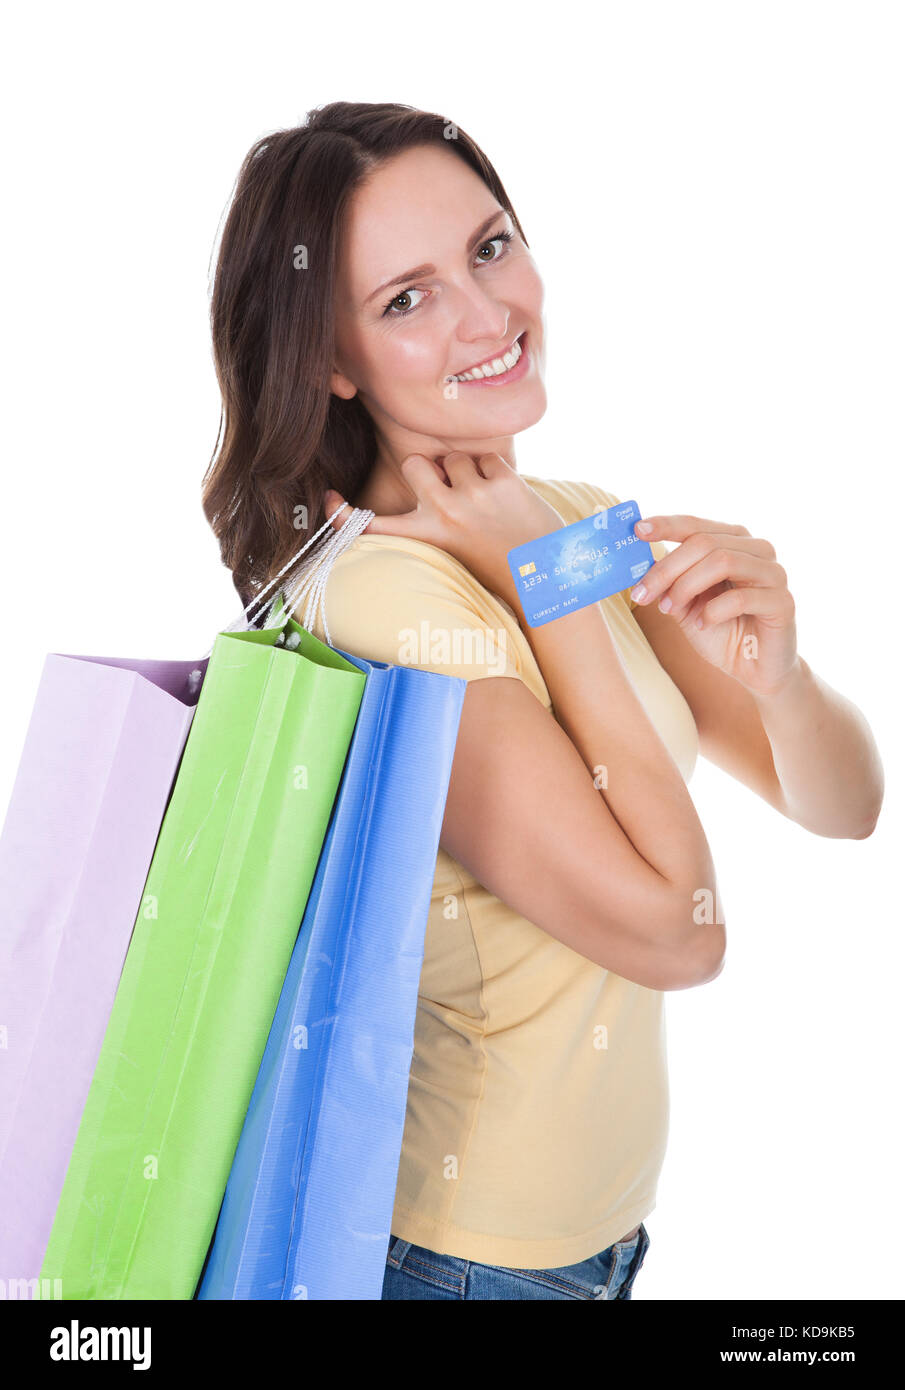 Smiling Woman With Shopping Bags Holding Credit Card Over White Background Stock Photo